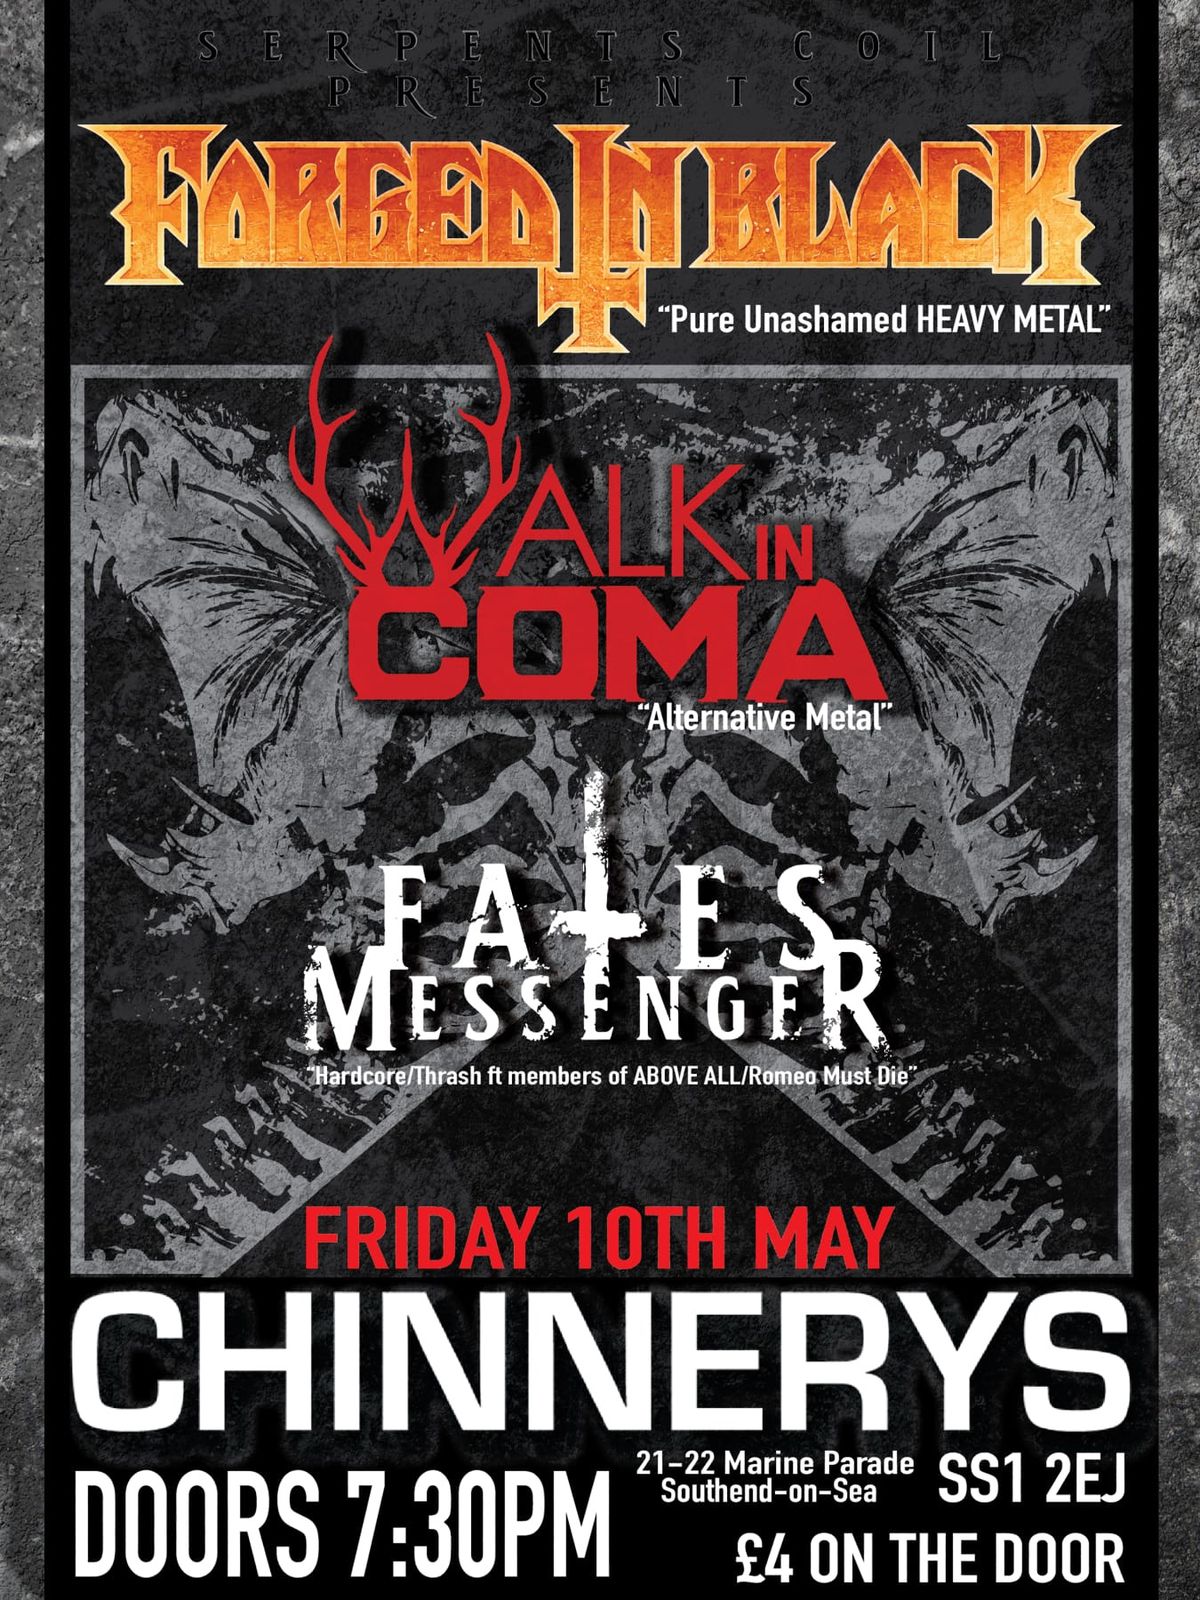 Forged in Black, Walk in Coma & Fates Messenger